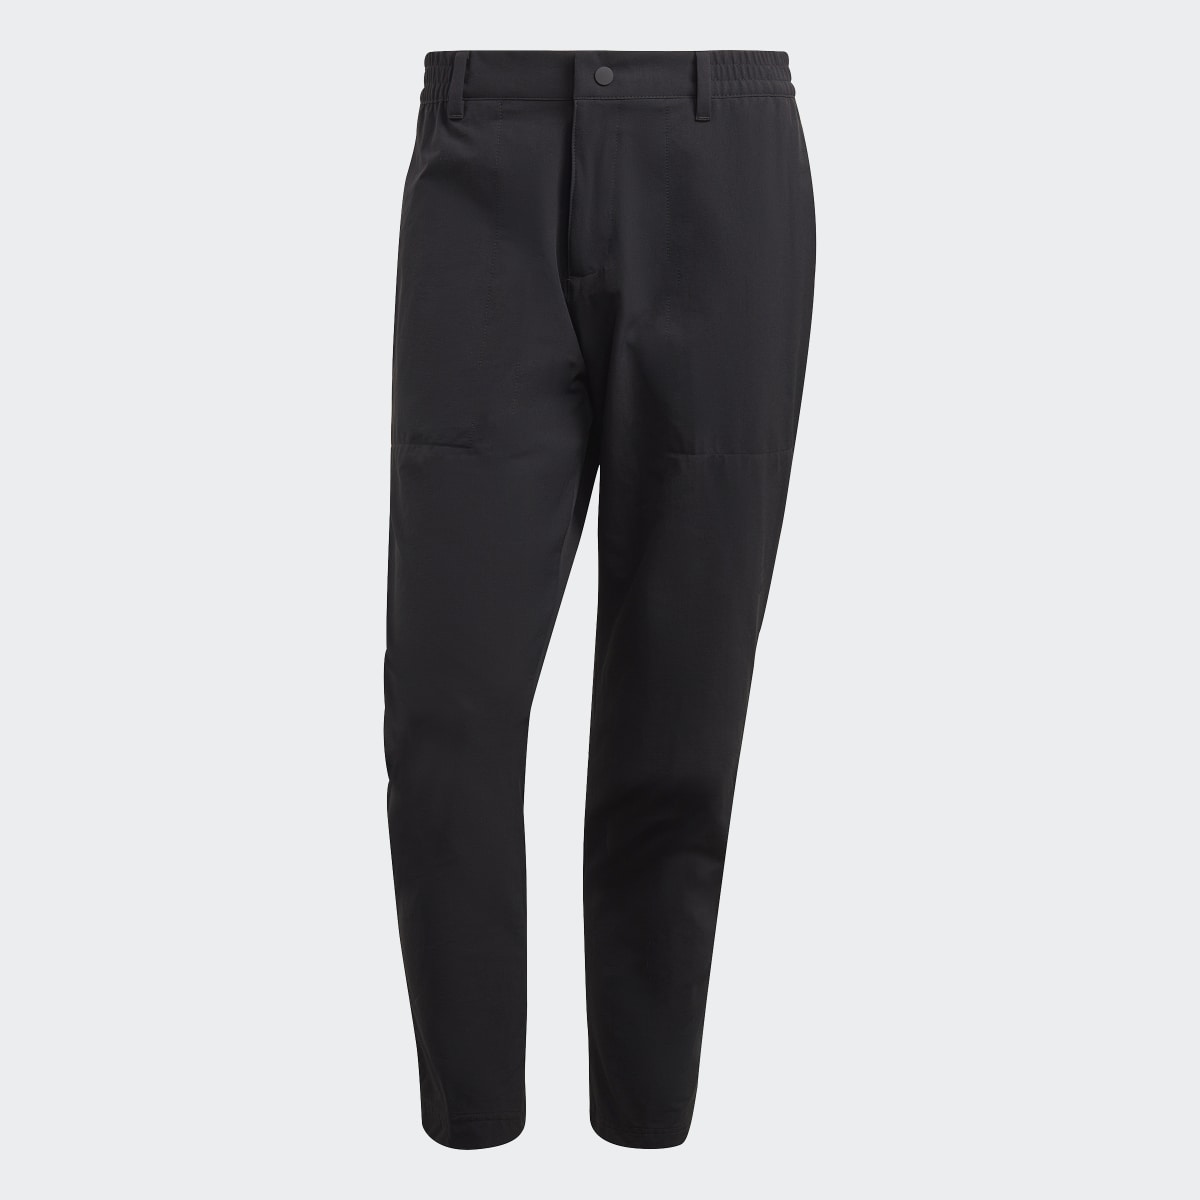 Adidas Go-To Commuter Golf Pants. 4